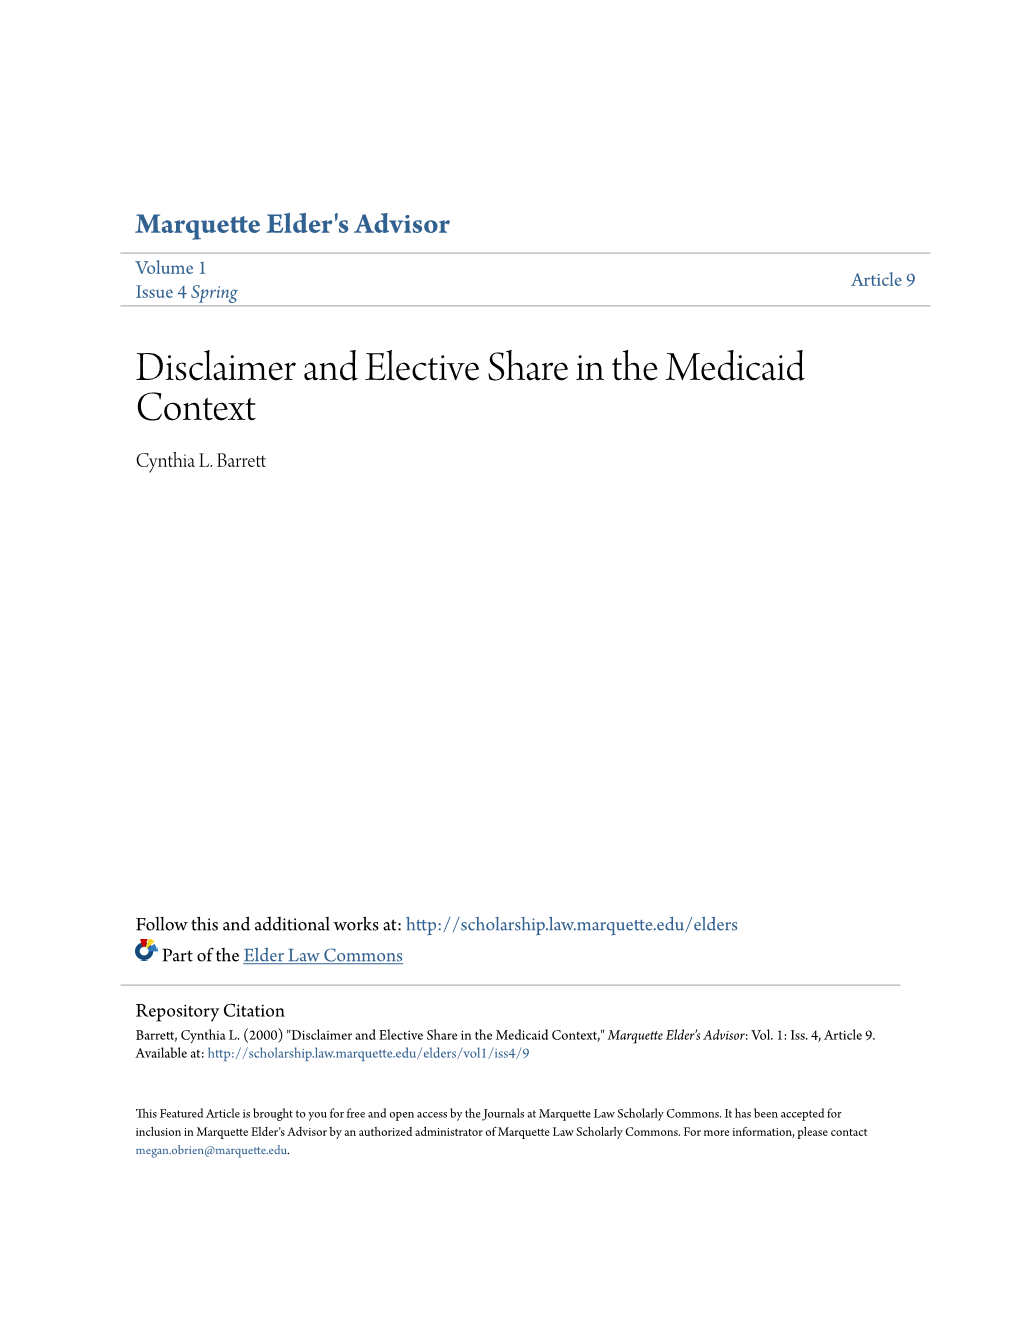 Disclaimer and Elective Share in the Medicaid Context Cynthia L